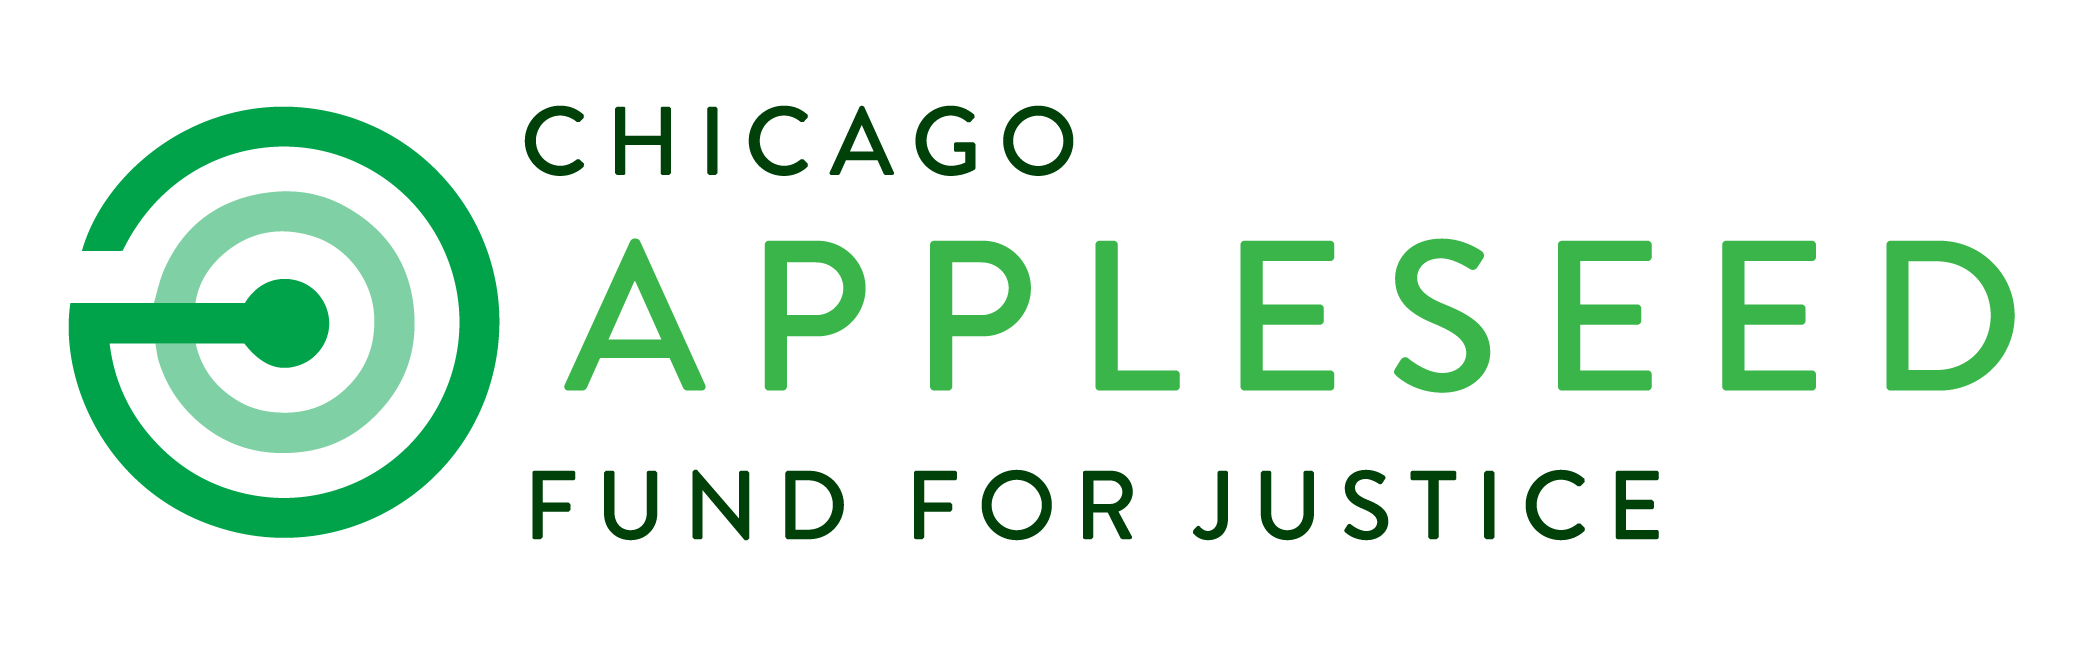 Chicago Appleseed Fund For Justice